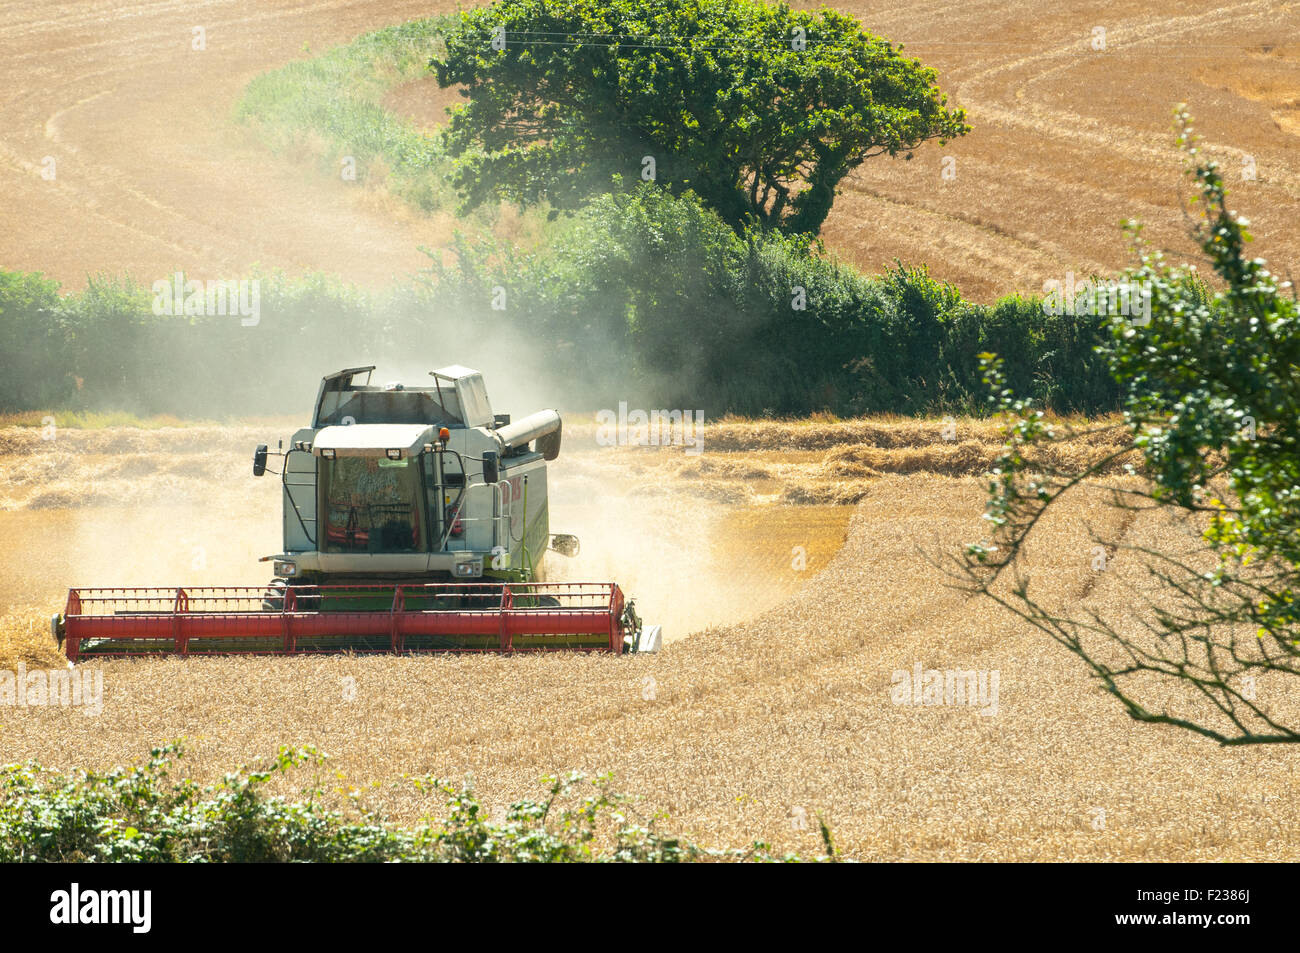 Combine harvester working in a field Stock Photo